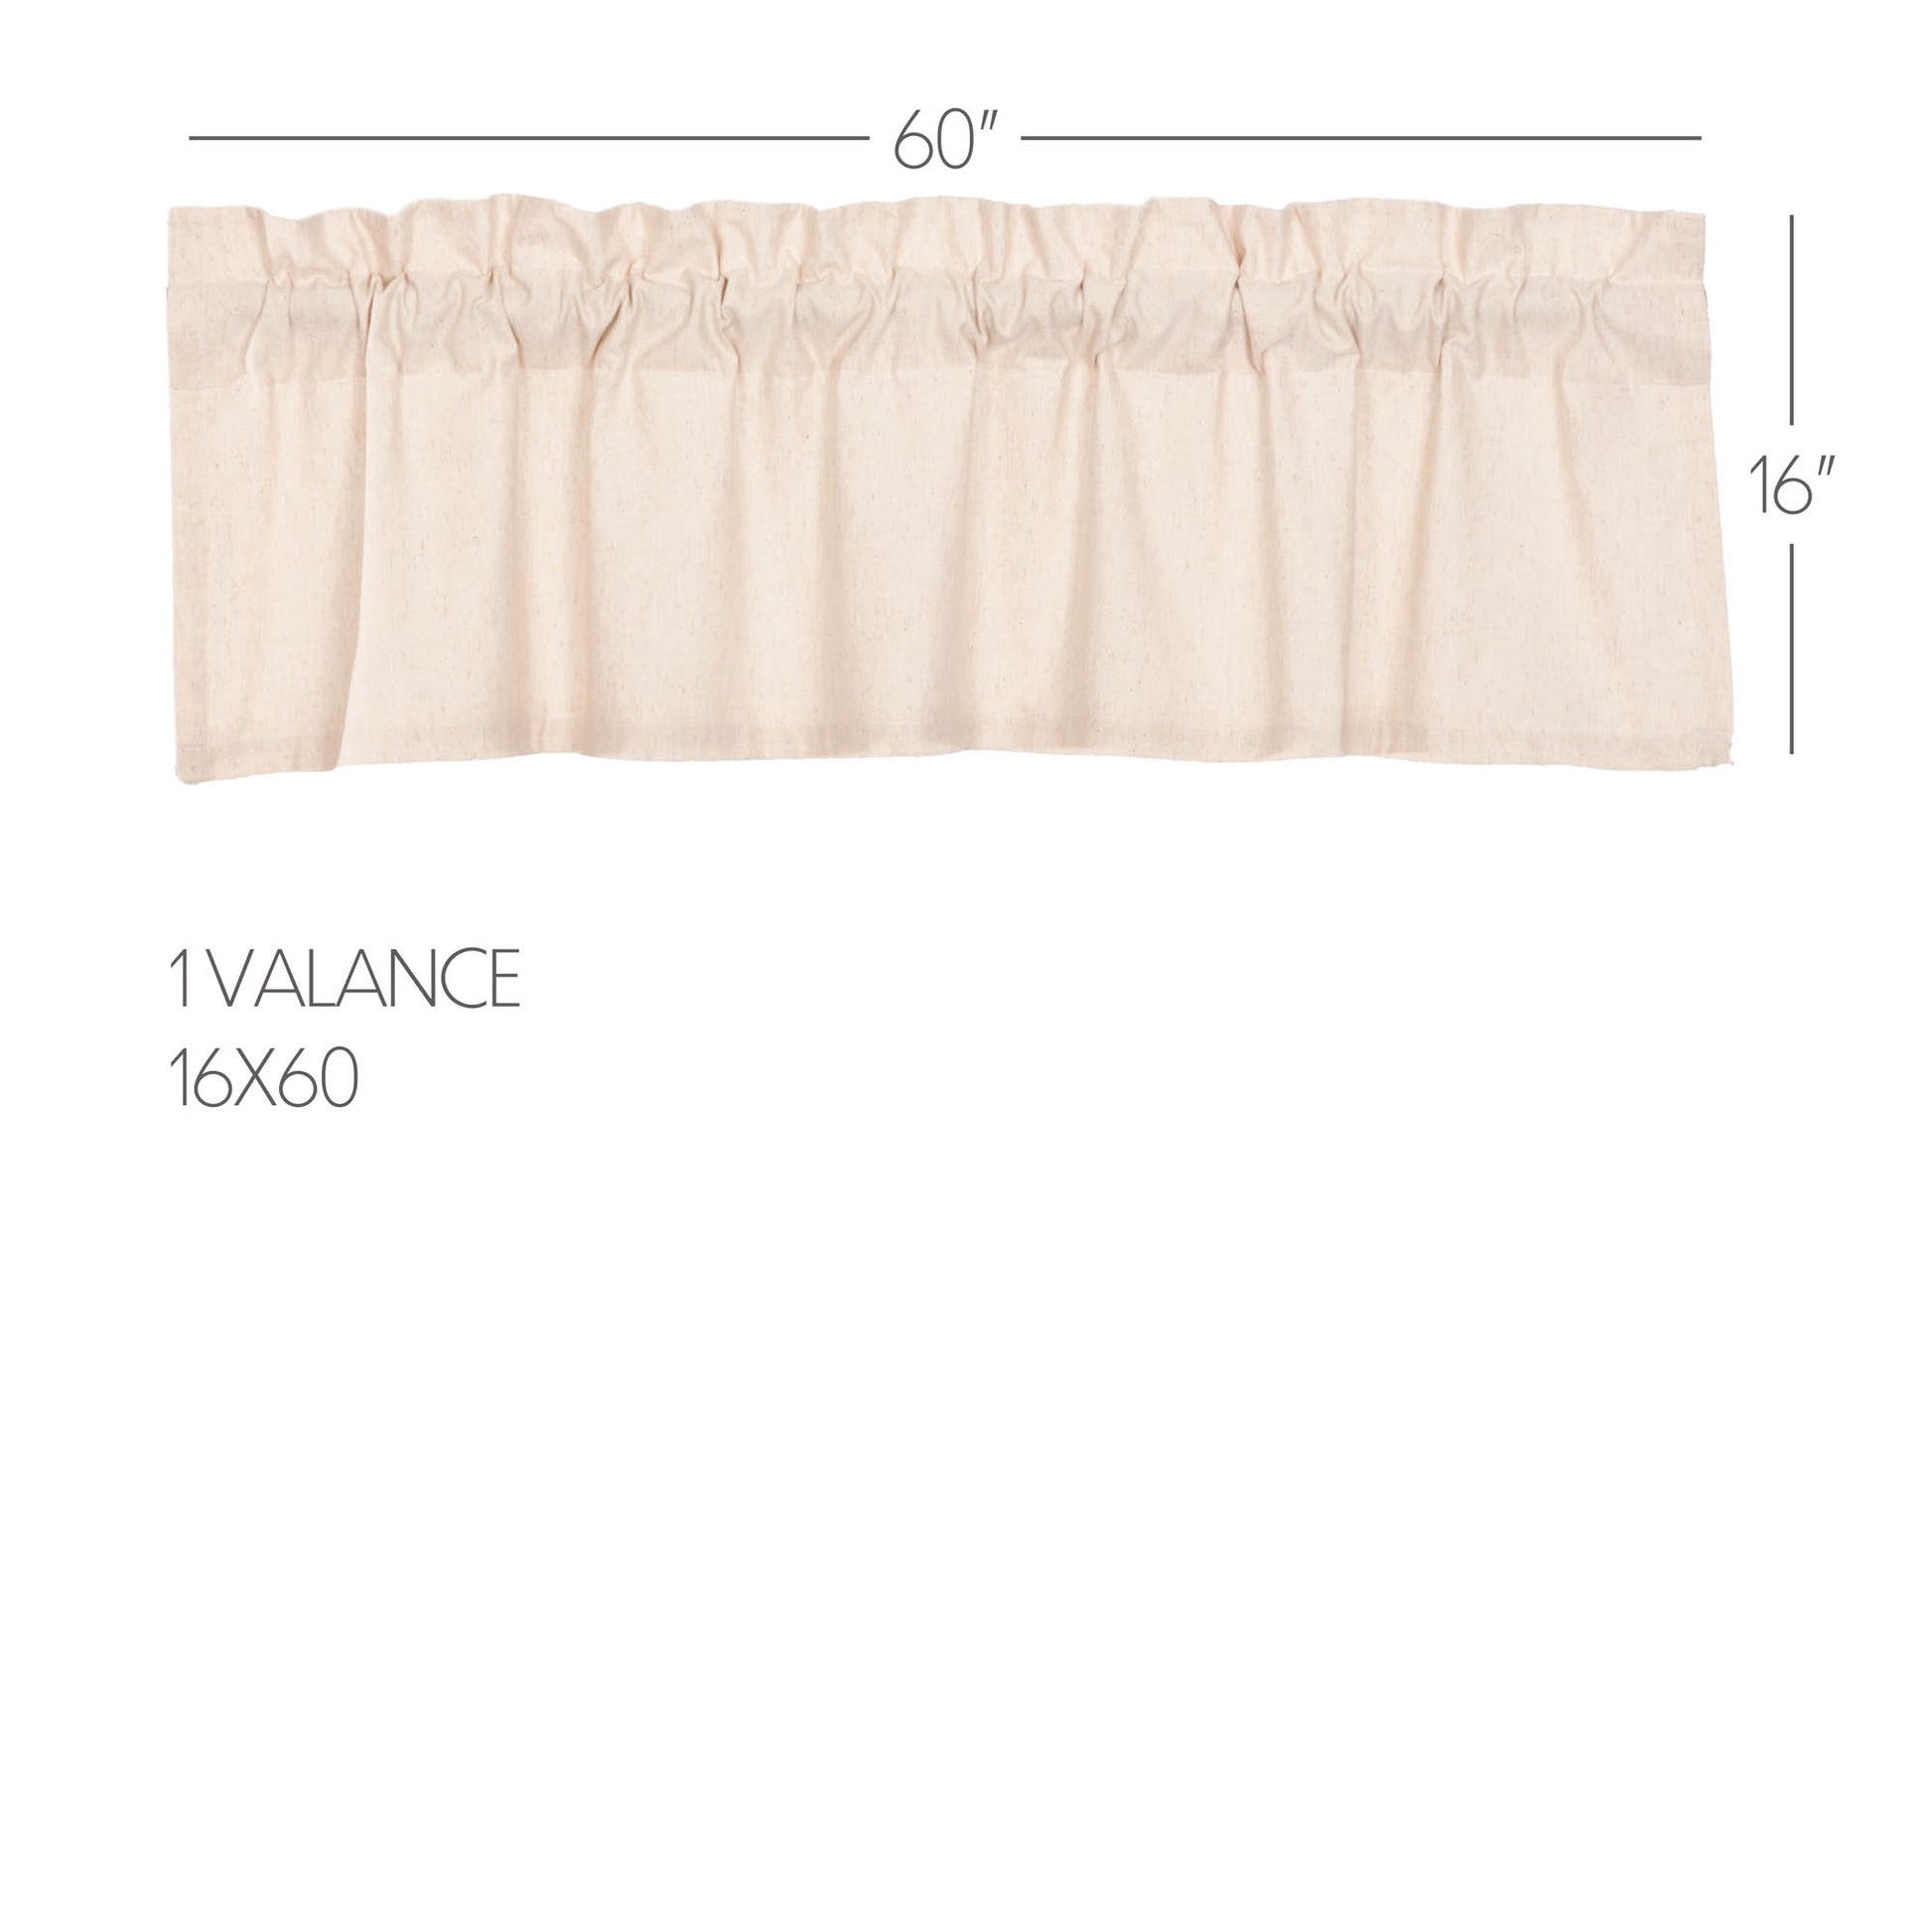 52301-Simple-Life-Flax-Natural-Valance-16x60-image-1